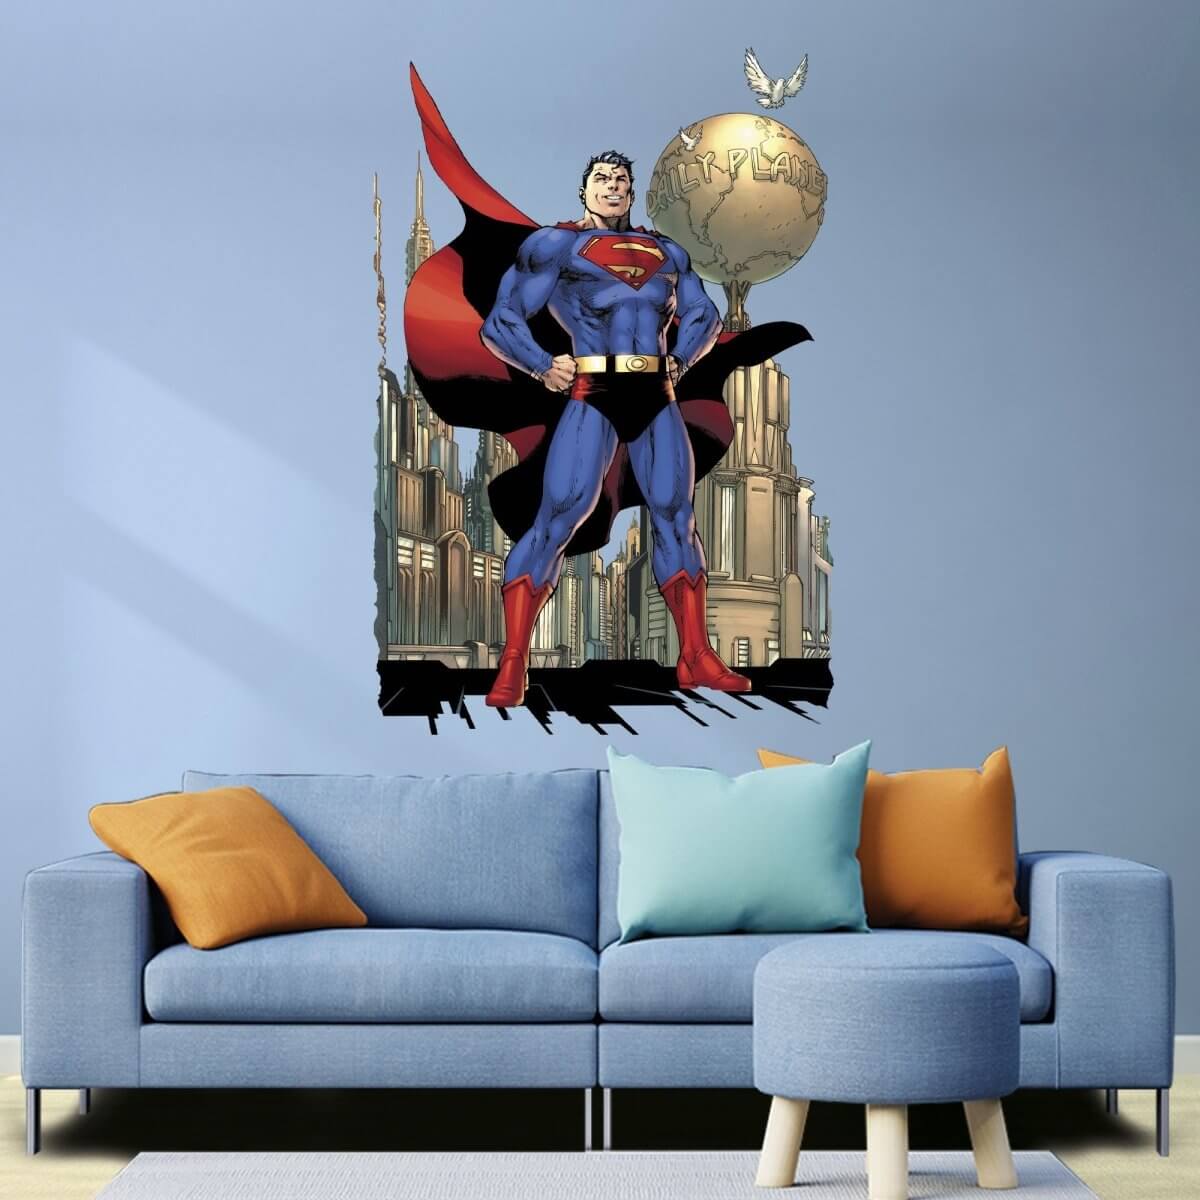 Kismet Decals Action Comics #1000 Comic Cover Series Licensed Wall Sticker - Easy DIY Home & Room Decor Wall Art - Kismet Decals